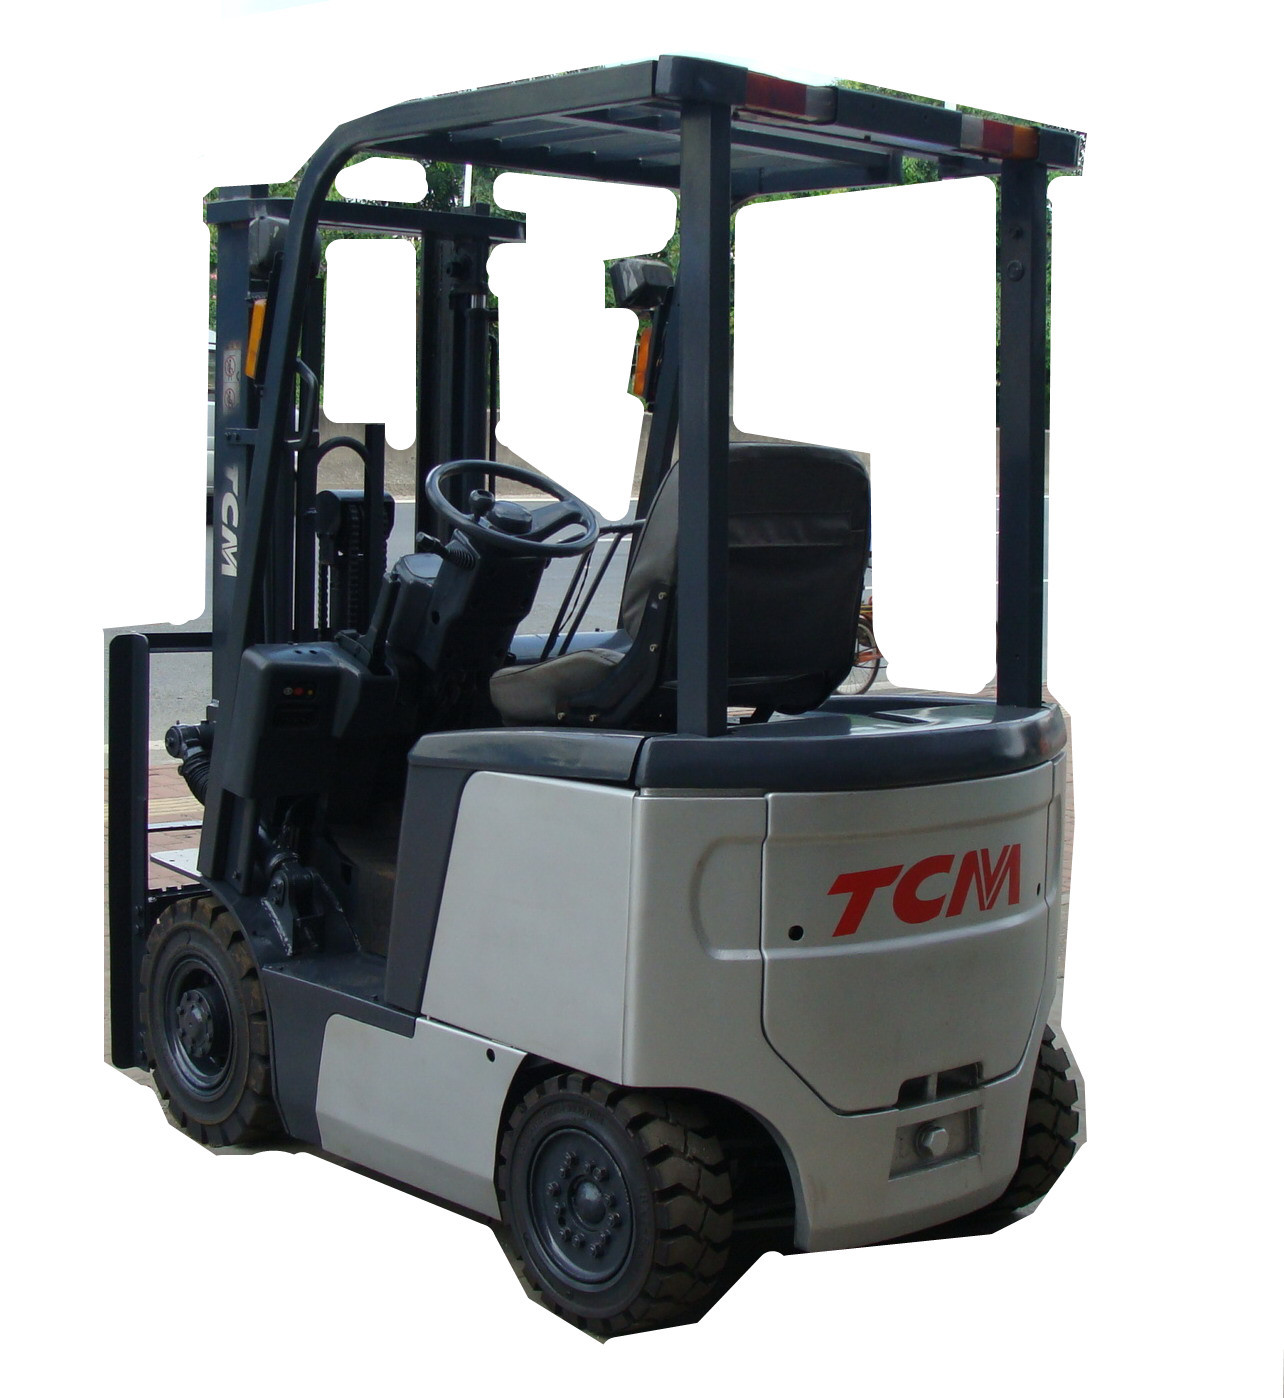 Dongguan/Shenzhen/Guangzhou/PRD Of large number goods in stock Imported Electric forklift lease Pier/automatic/logistics